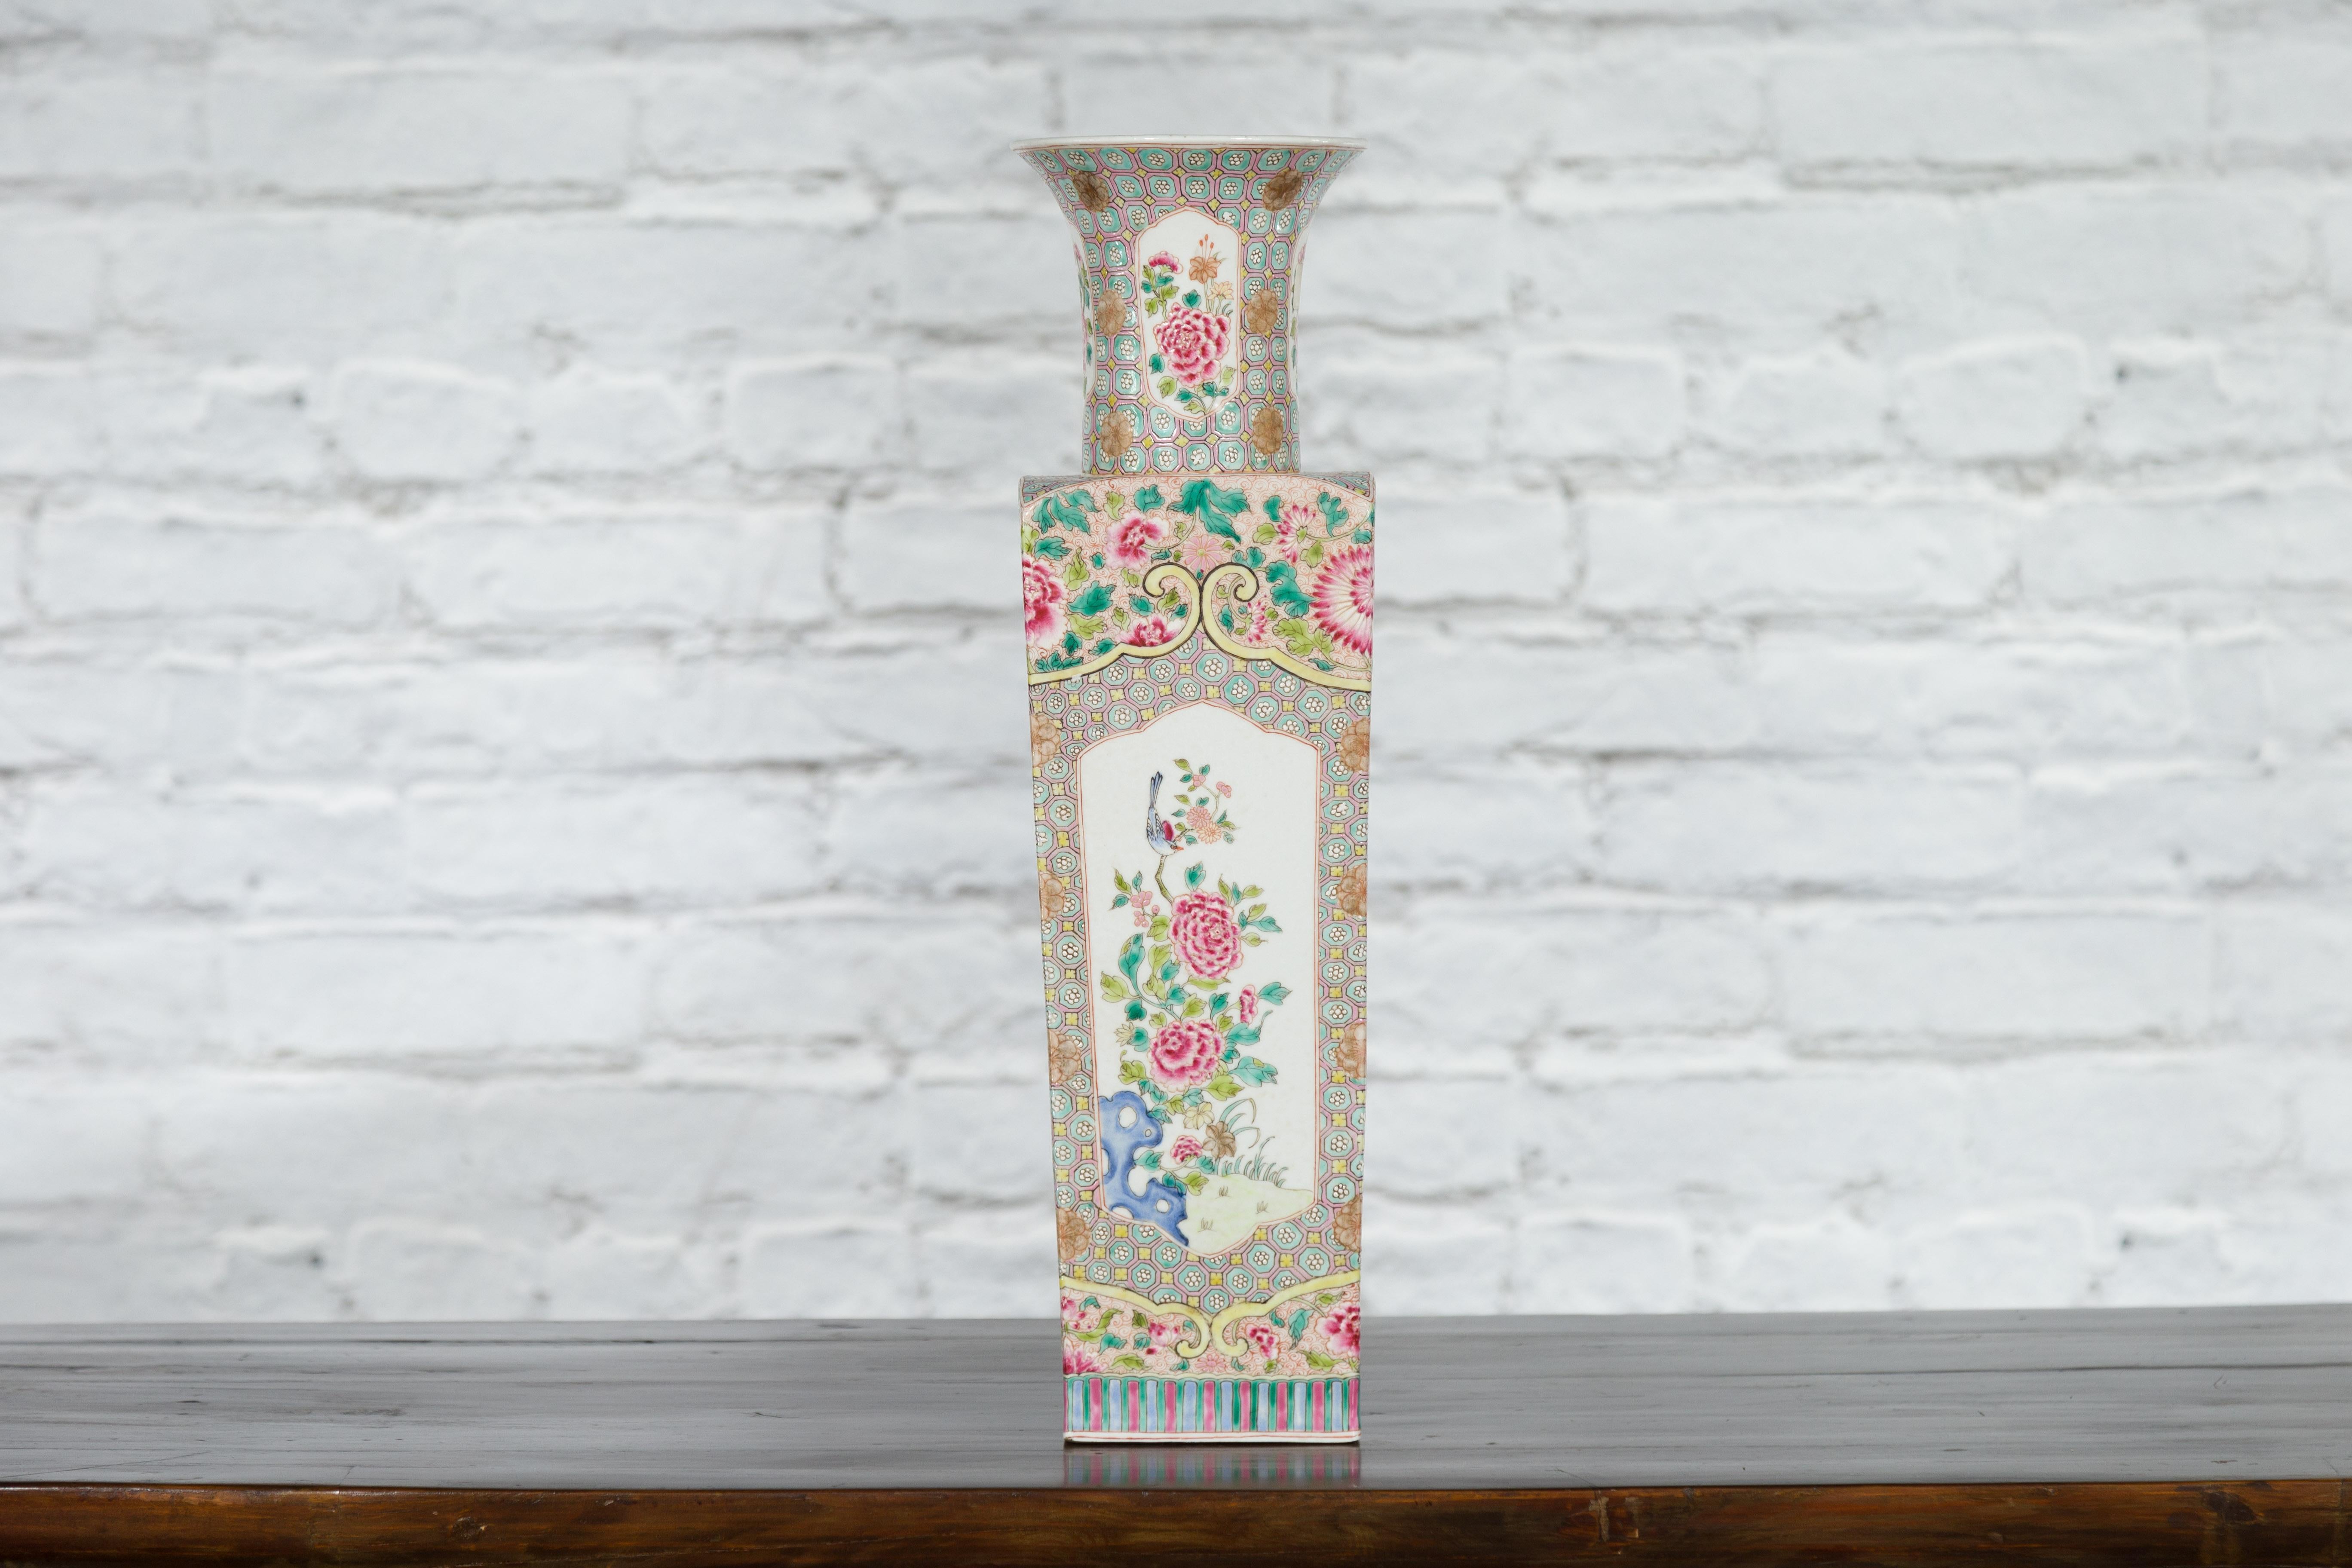 A vintage Chinese square-shaped vase from the mid 20th century with floral décor. Created in China during the Midcentury period, this vase features a flaring neck showcasing a 4